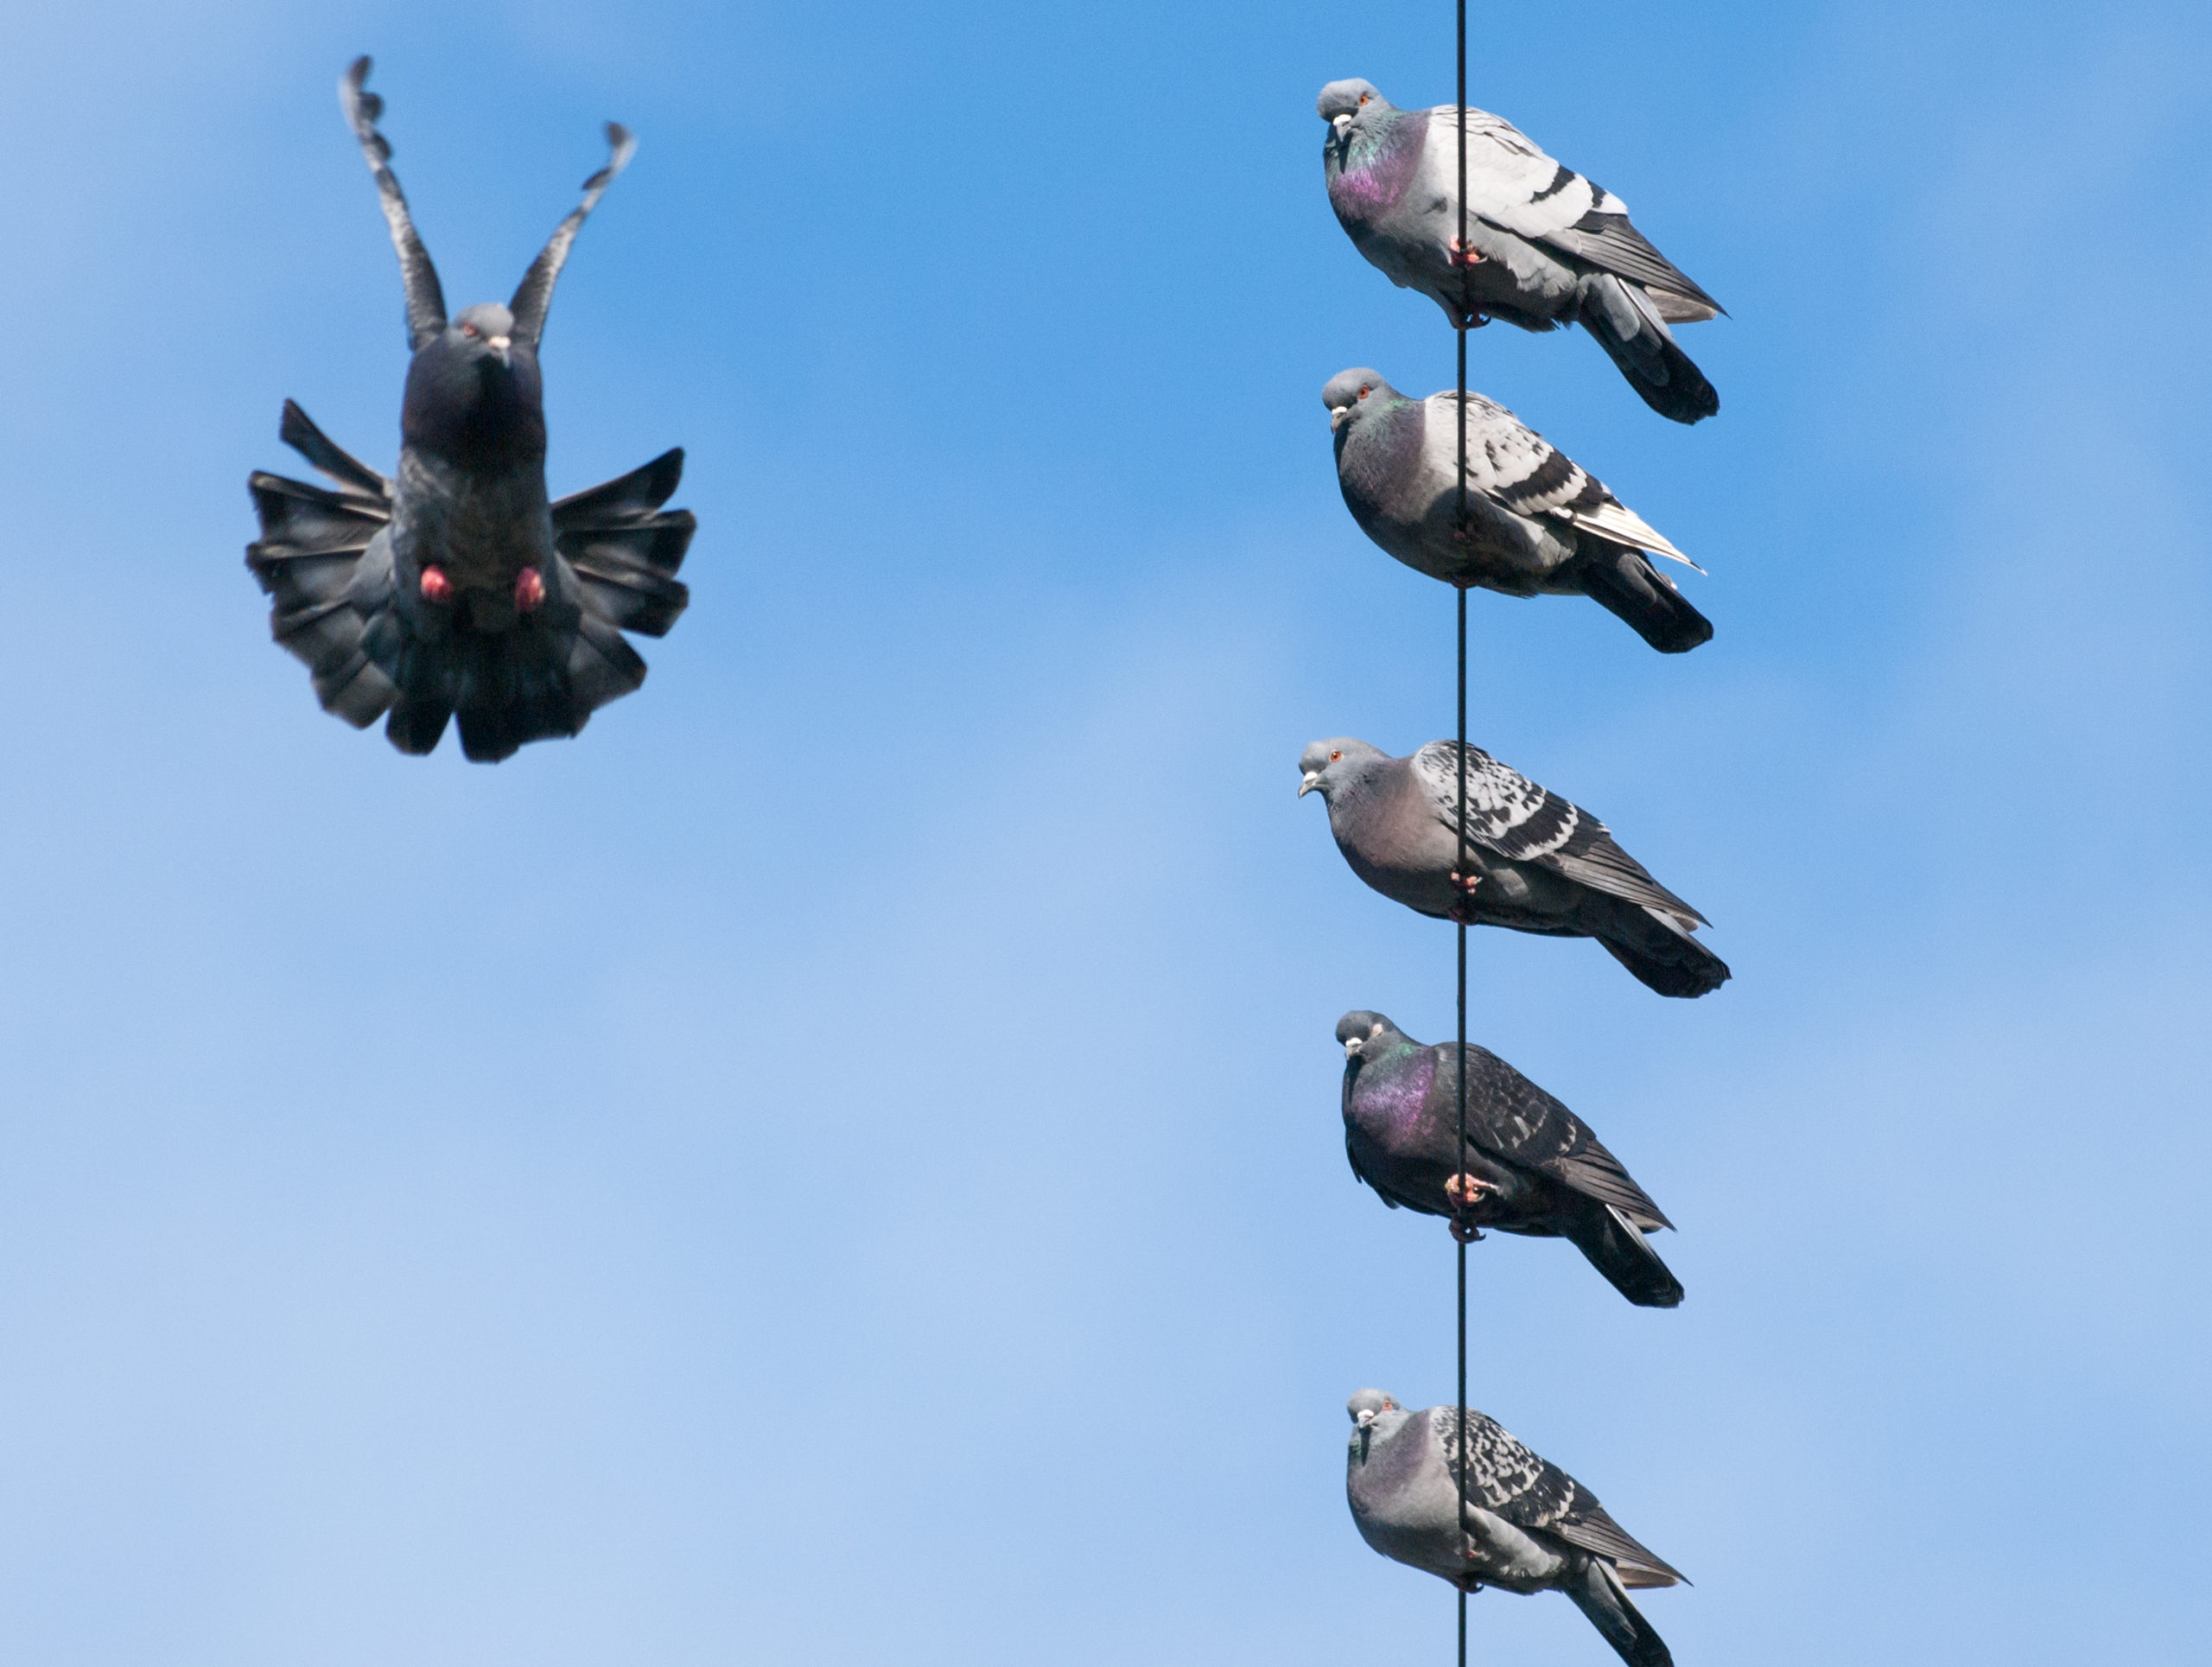 Pigeons on a Wire with Pigeon on Approach